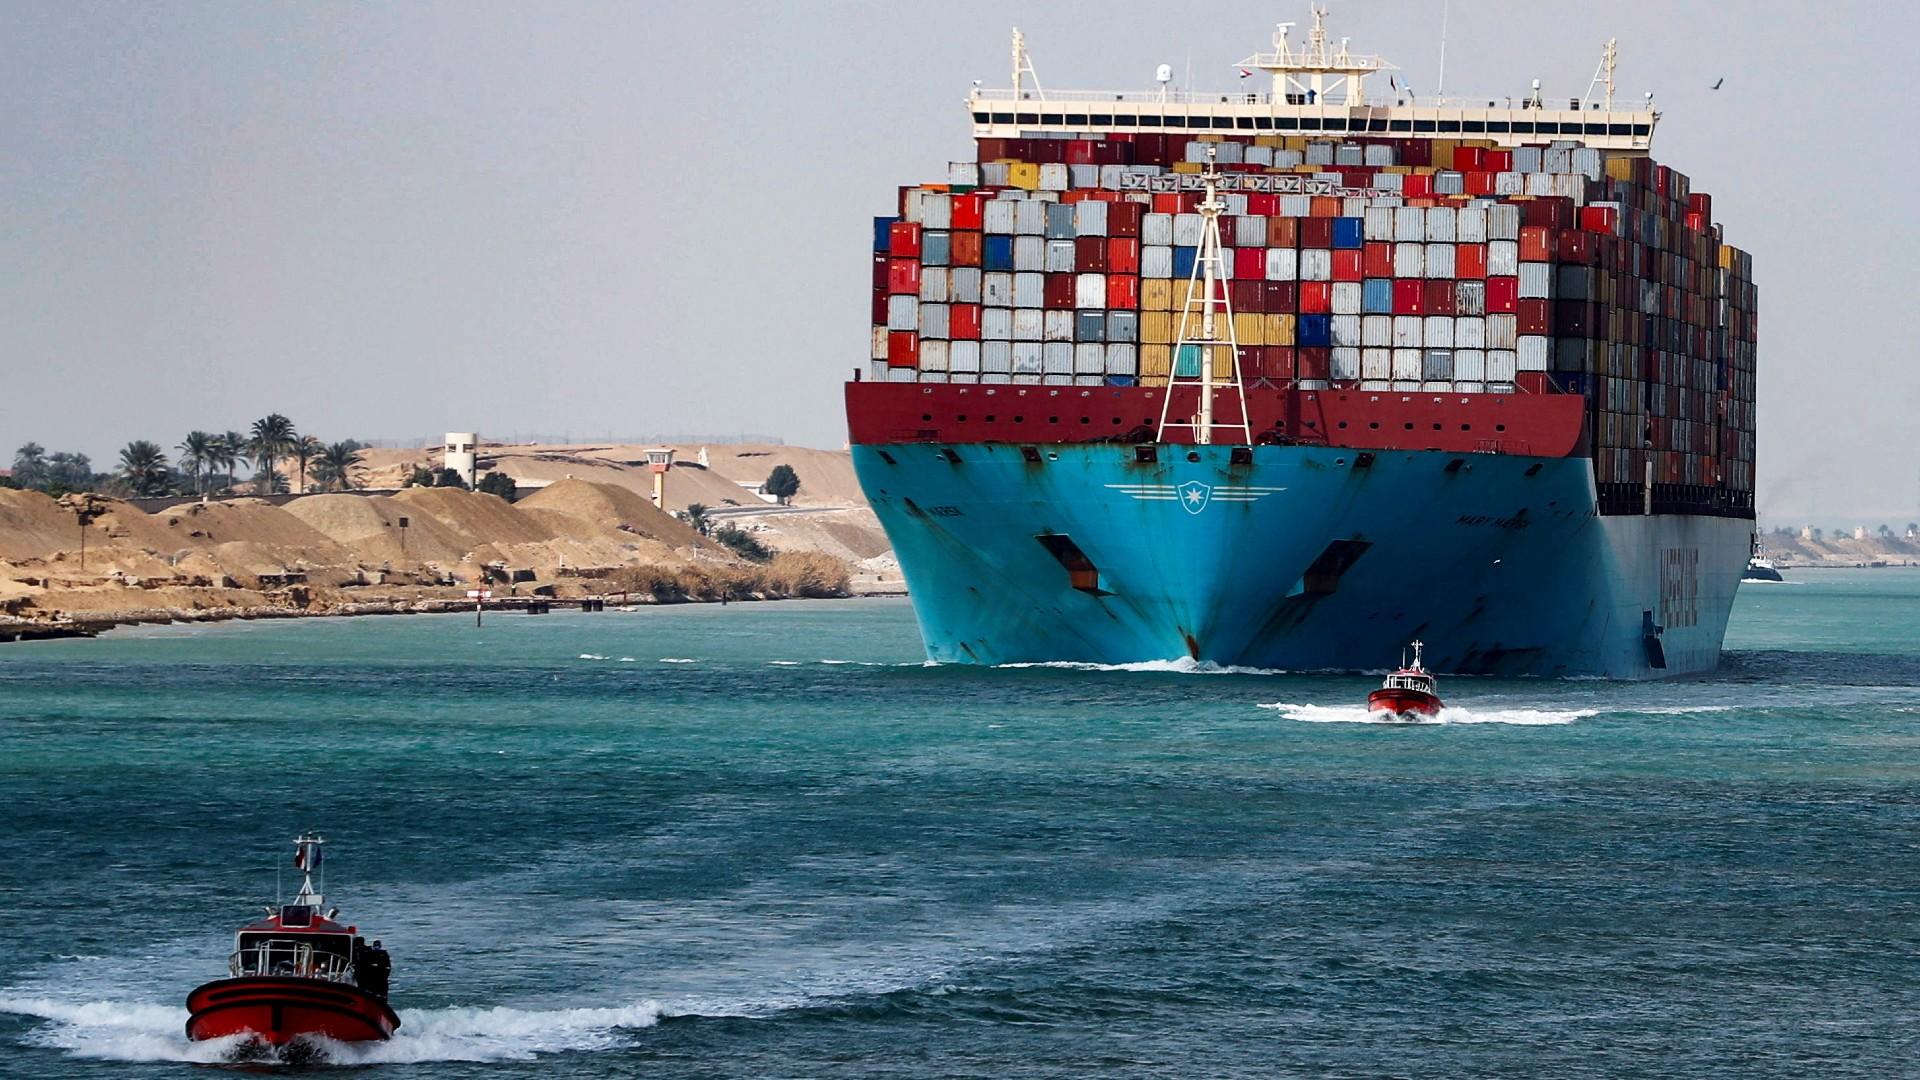 A shipping container passes through the Suez Canal in Suez, Egypt on 15 February 2022 (Reuters)